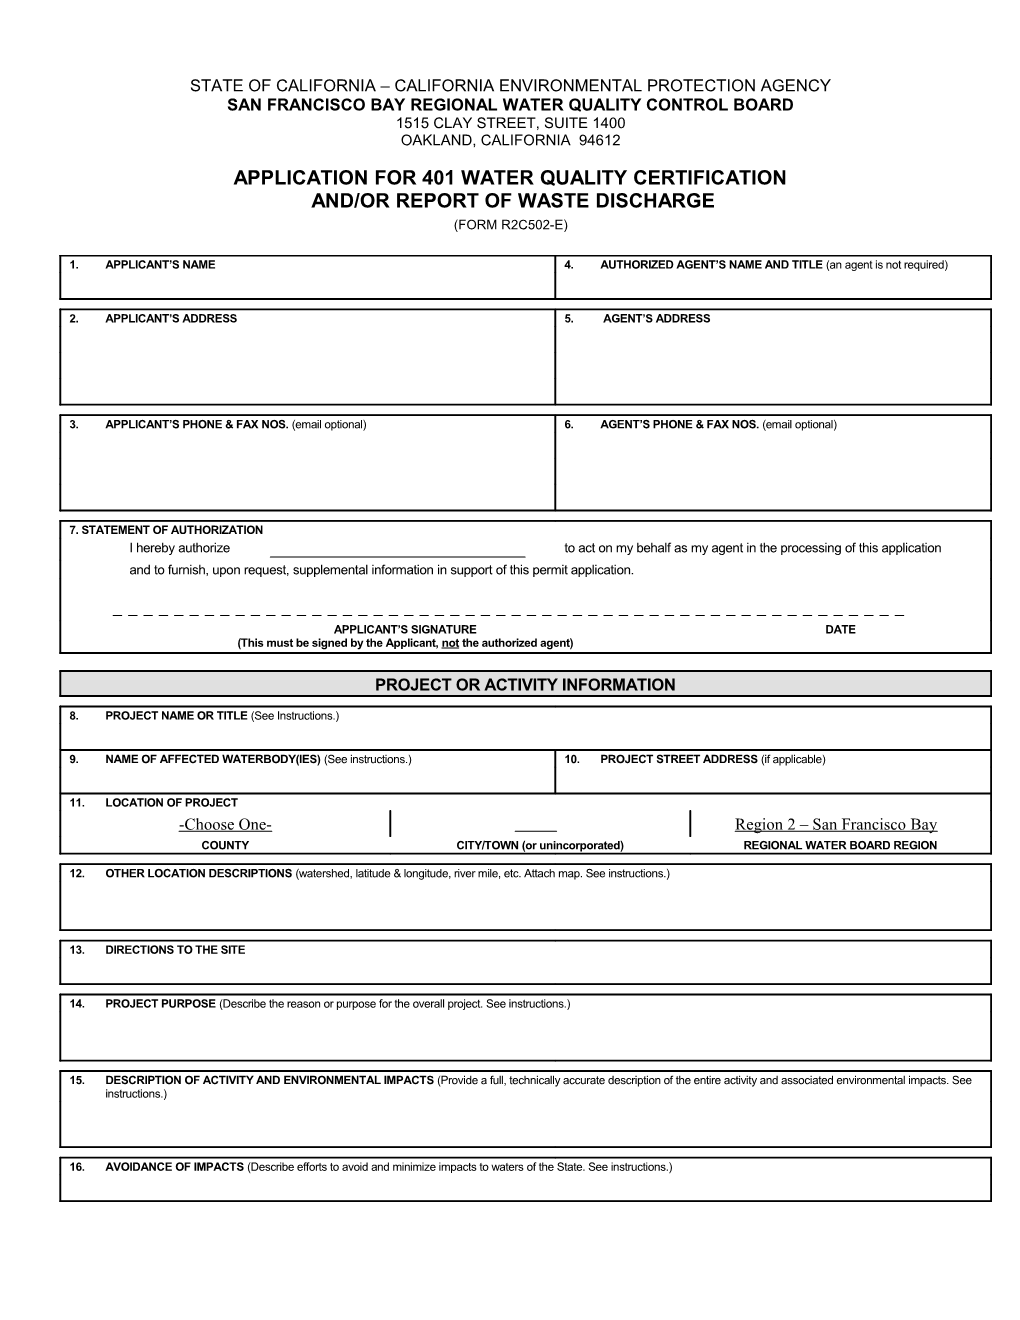 Application for 401 WQC & ROWD